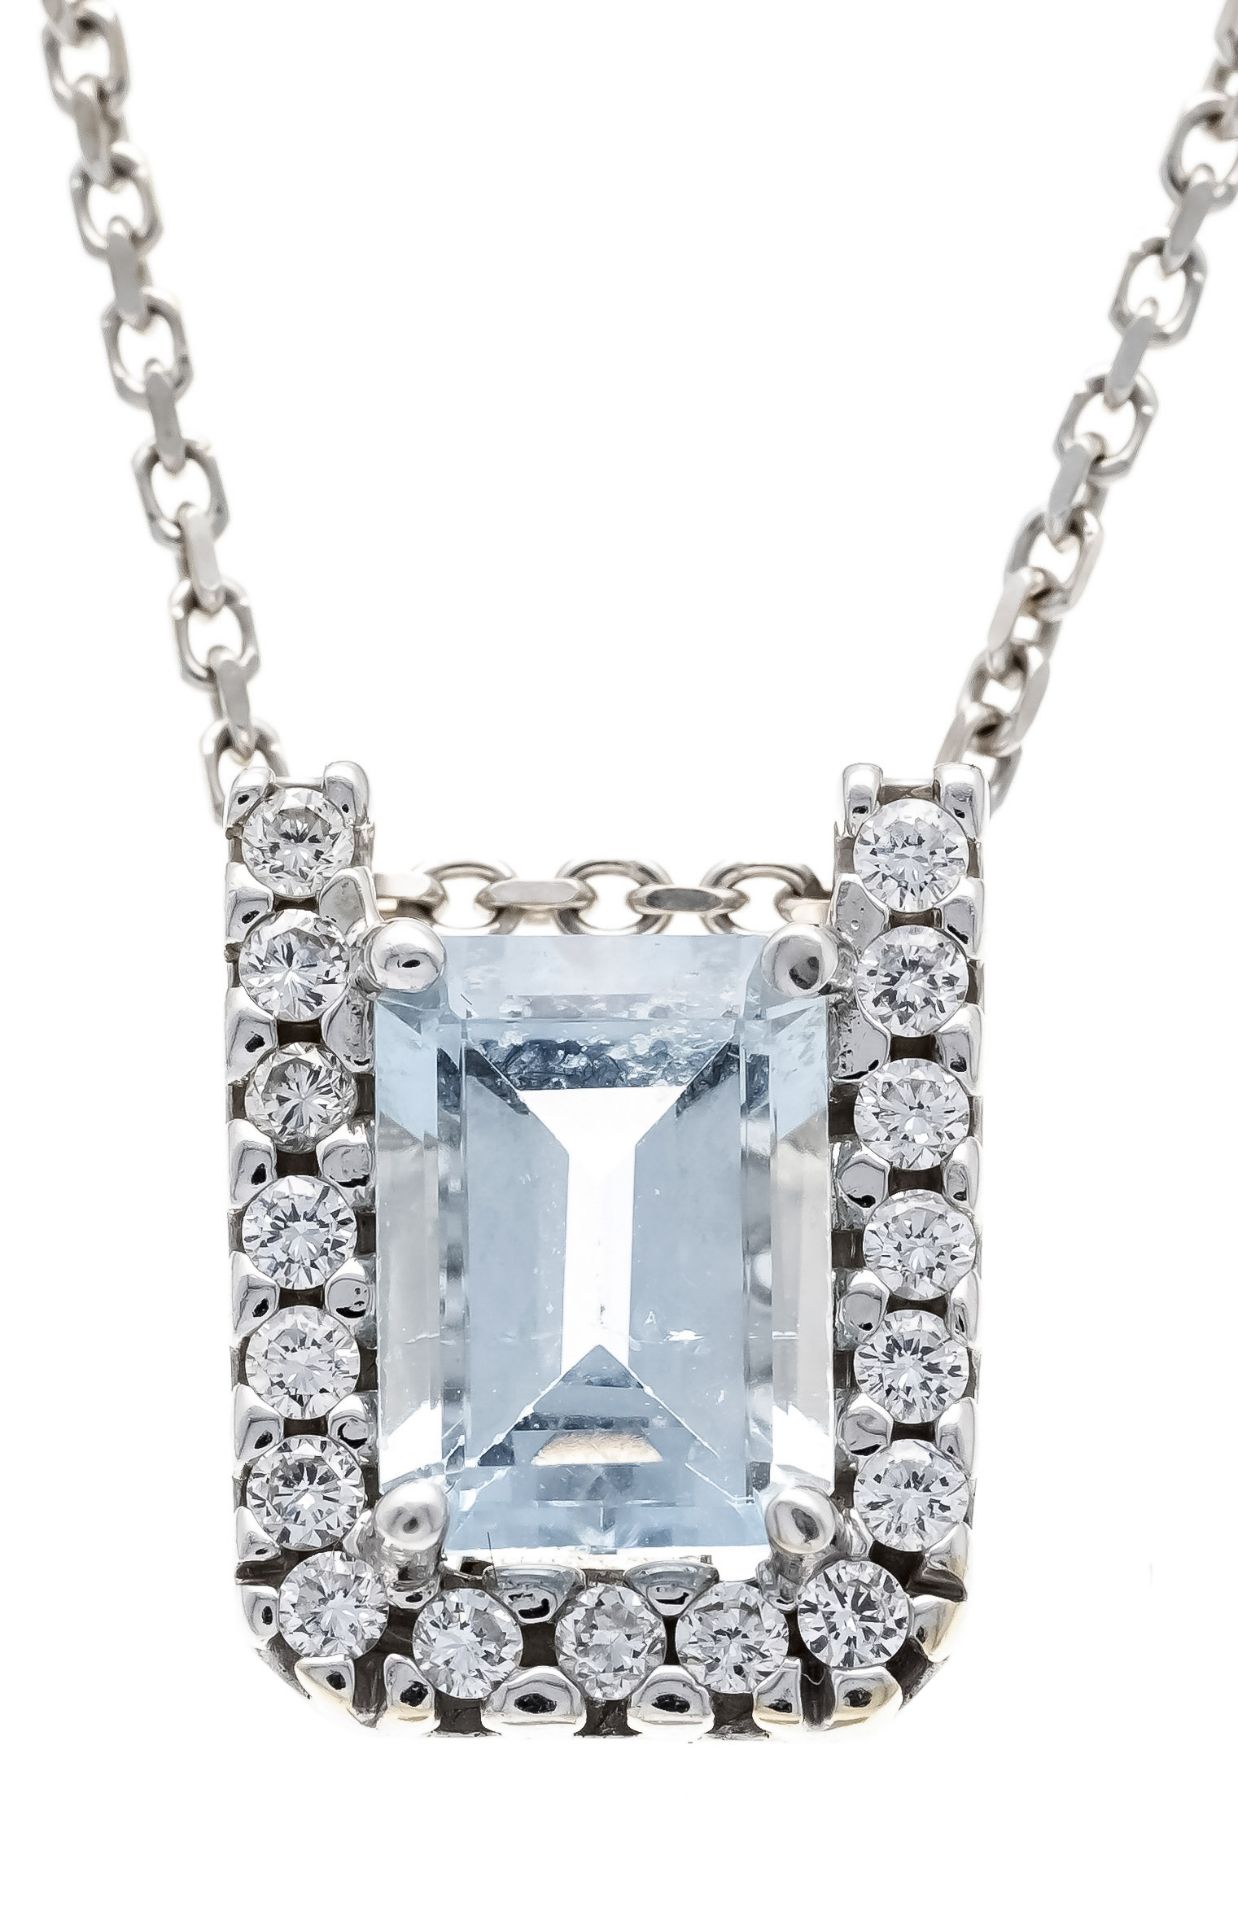 Aquamarine pendant WG 750/000 with an emerald-cut faceted aquamarine 1.30 ct in light to pale